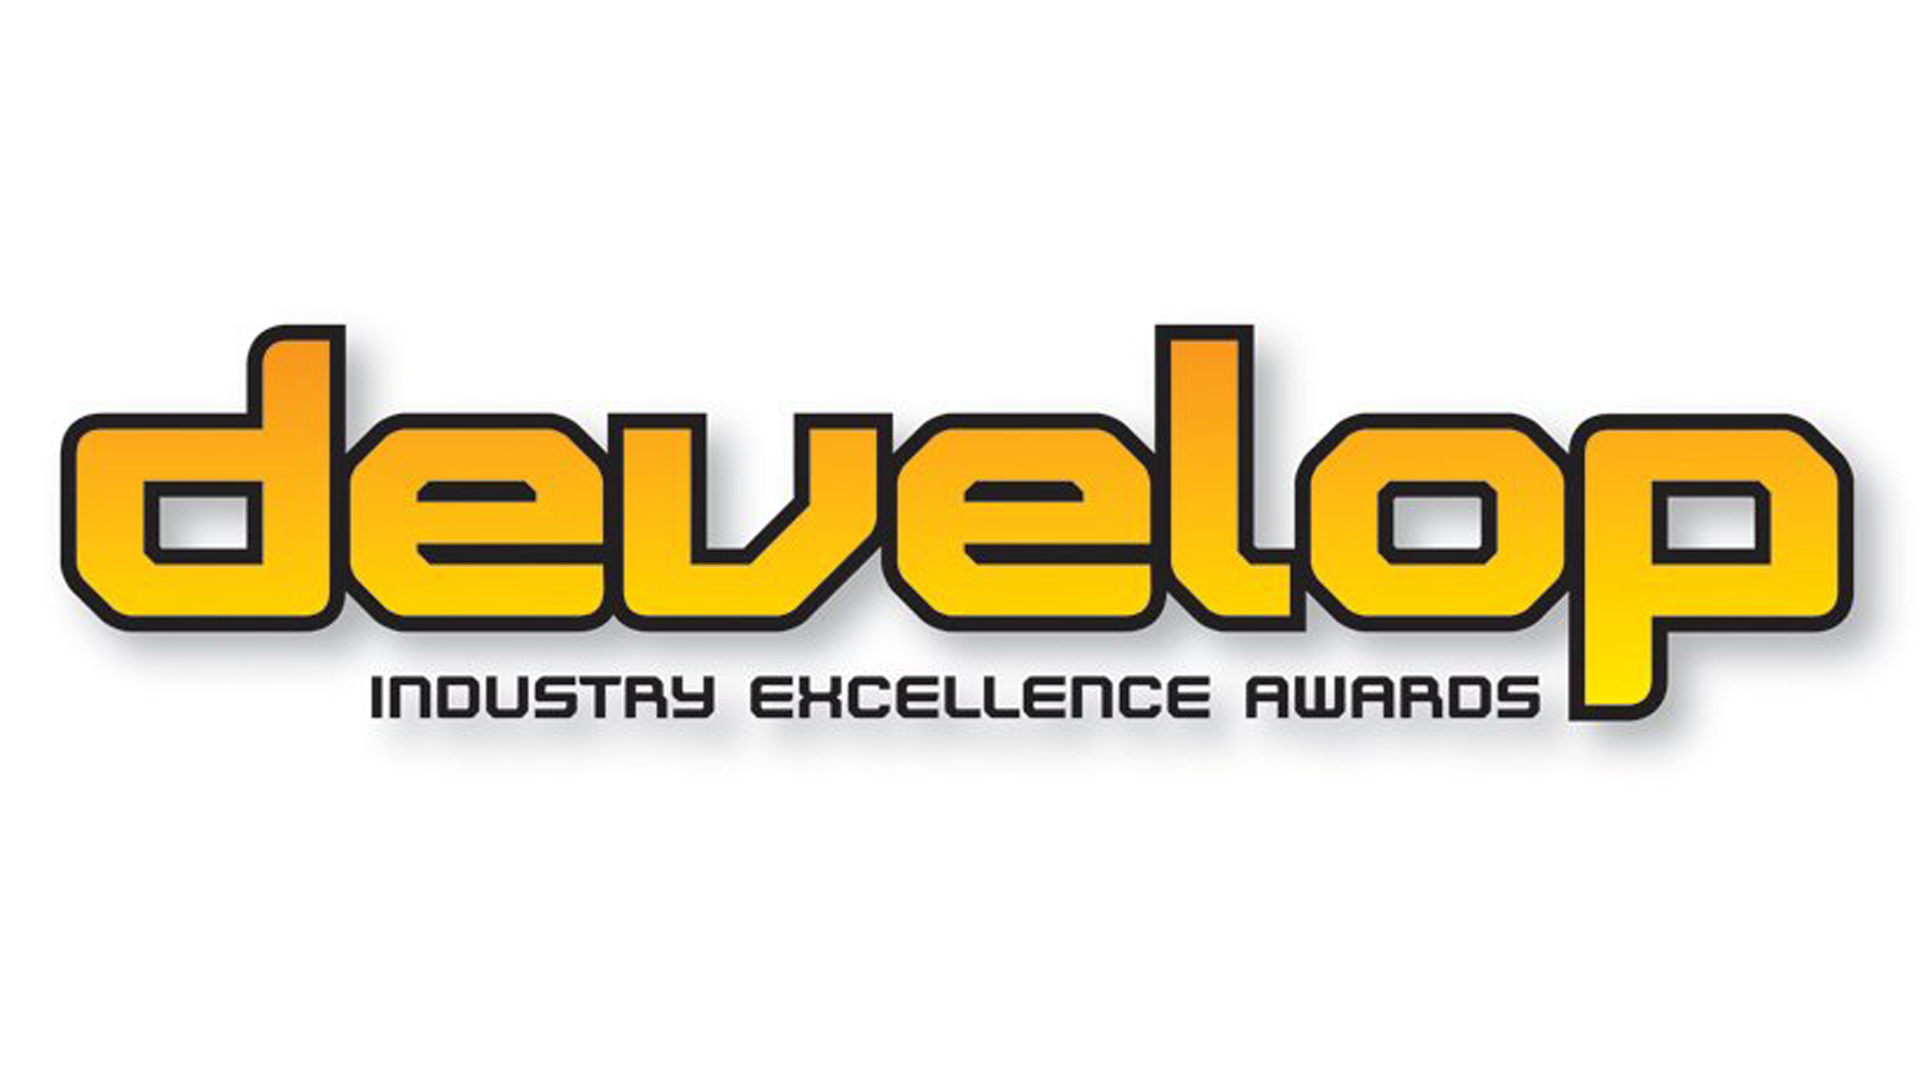 Develop Industry Excellence Awards